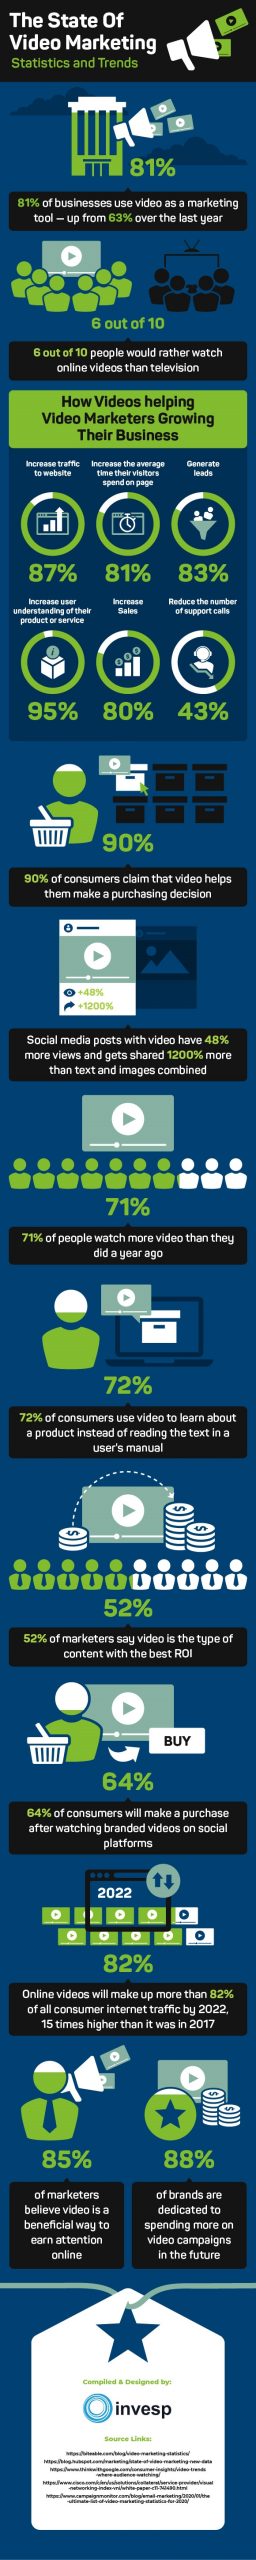 Why Video Marketing is Crucial for Your Online Business